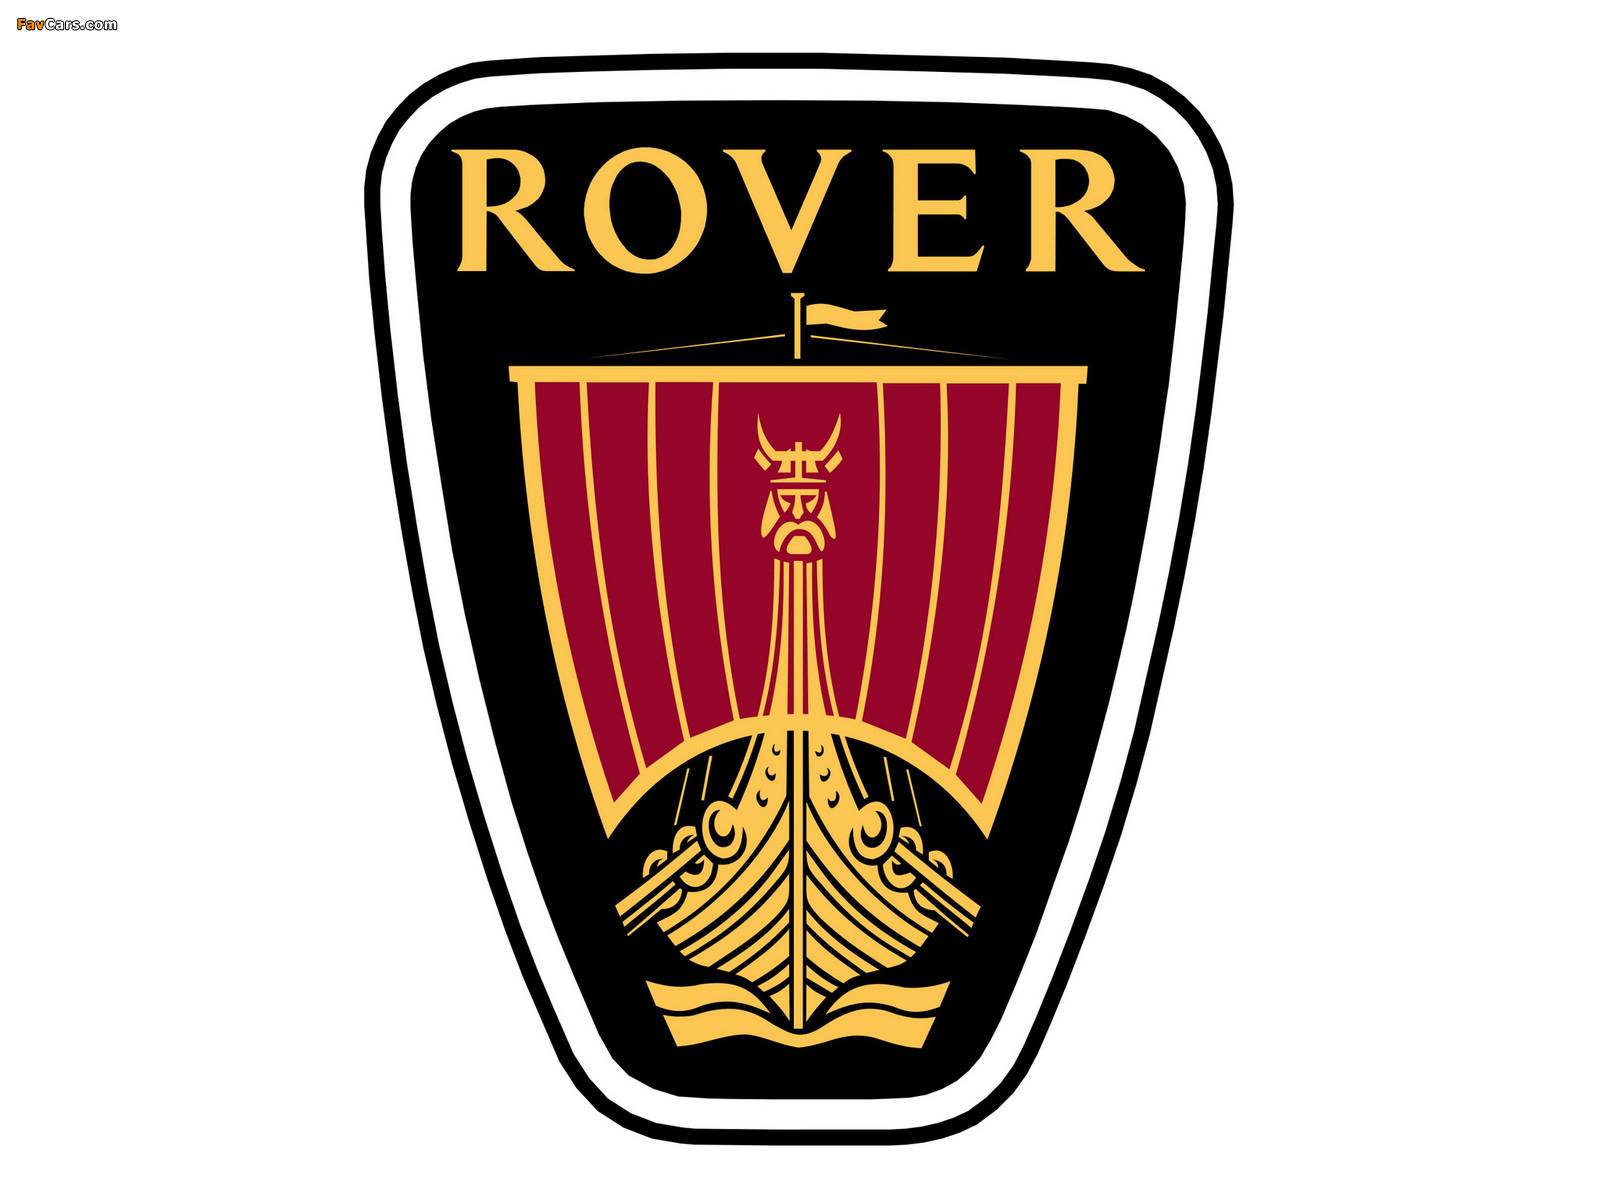 Rover wallpapers (1600 x 1200)